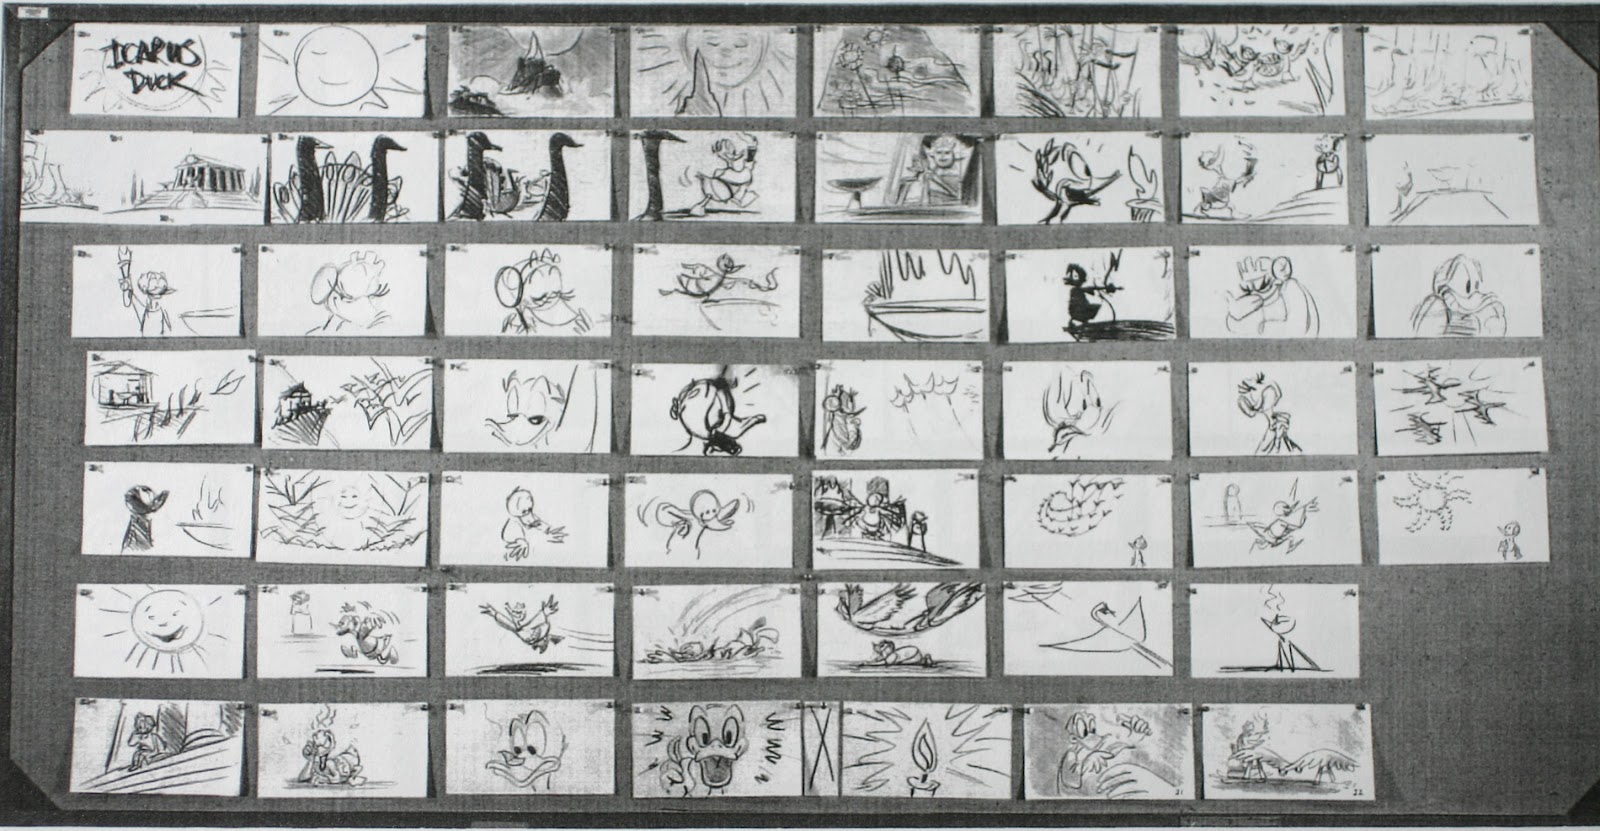 How to make great storyboards, even if you can’t draw